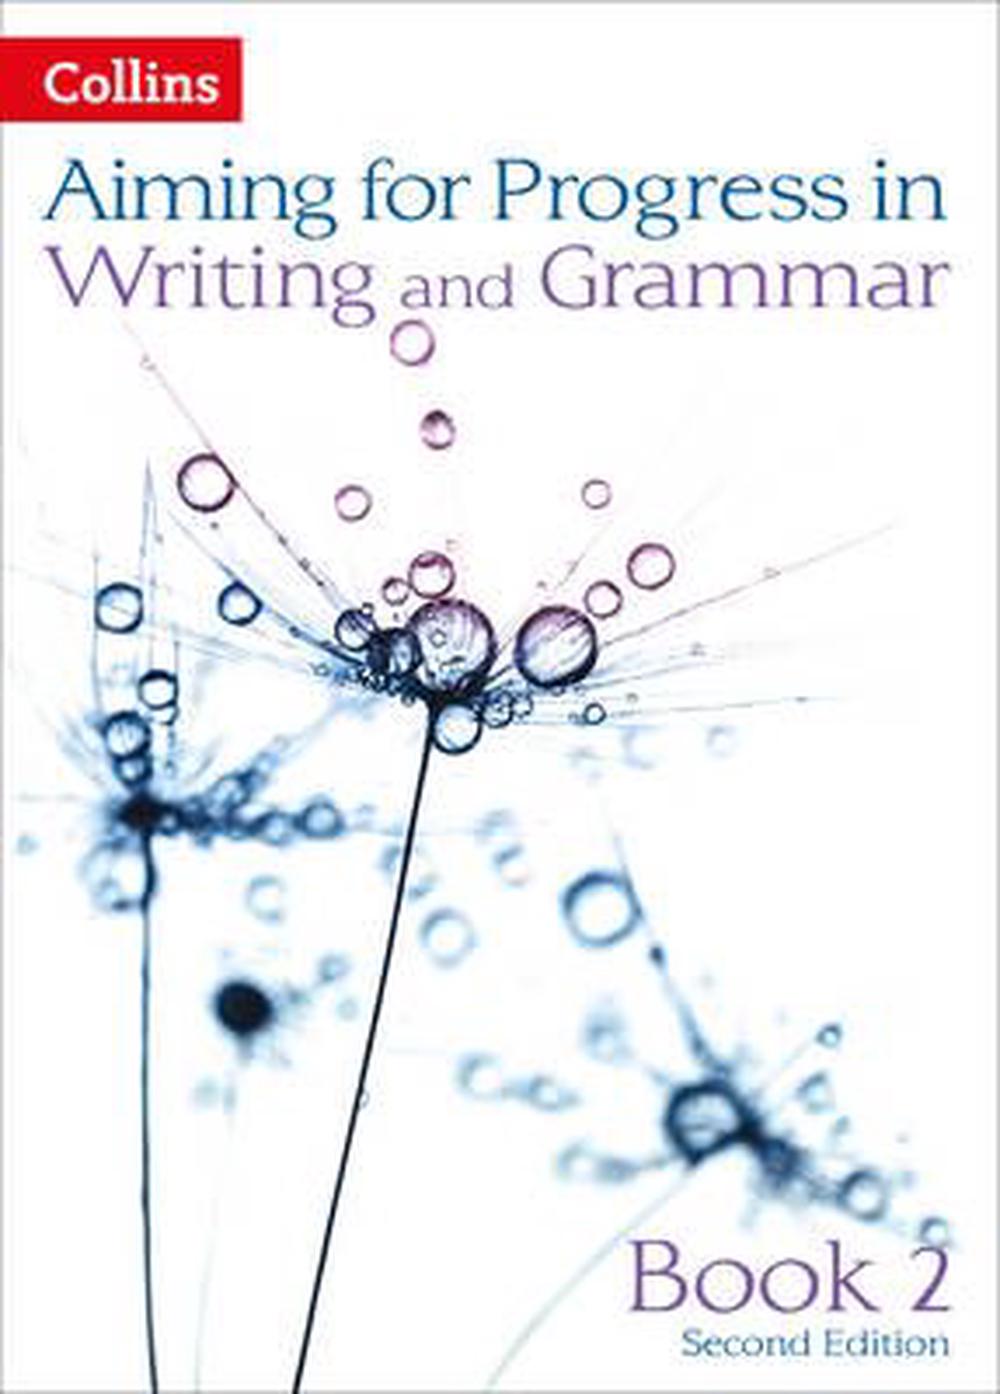 Collins Aiming For Progress In Writing And Grammer Book 2 Second Edition